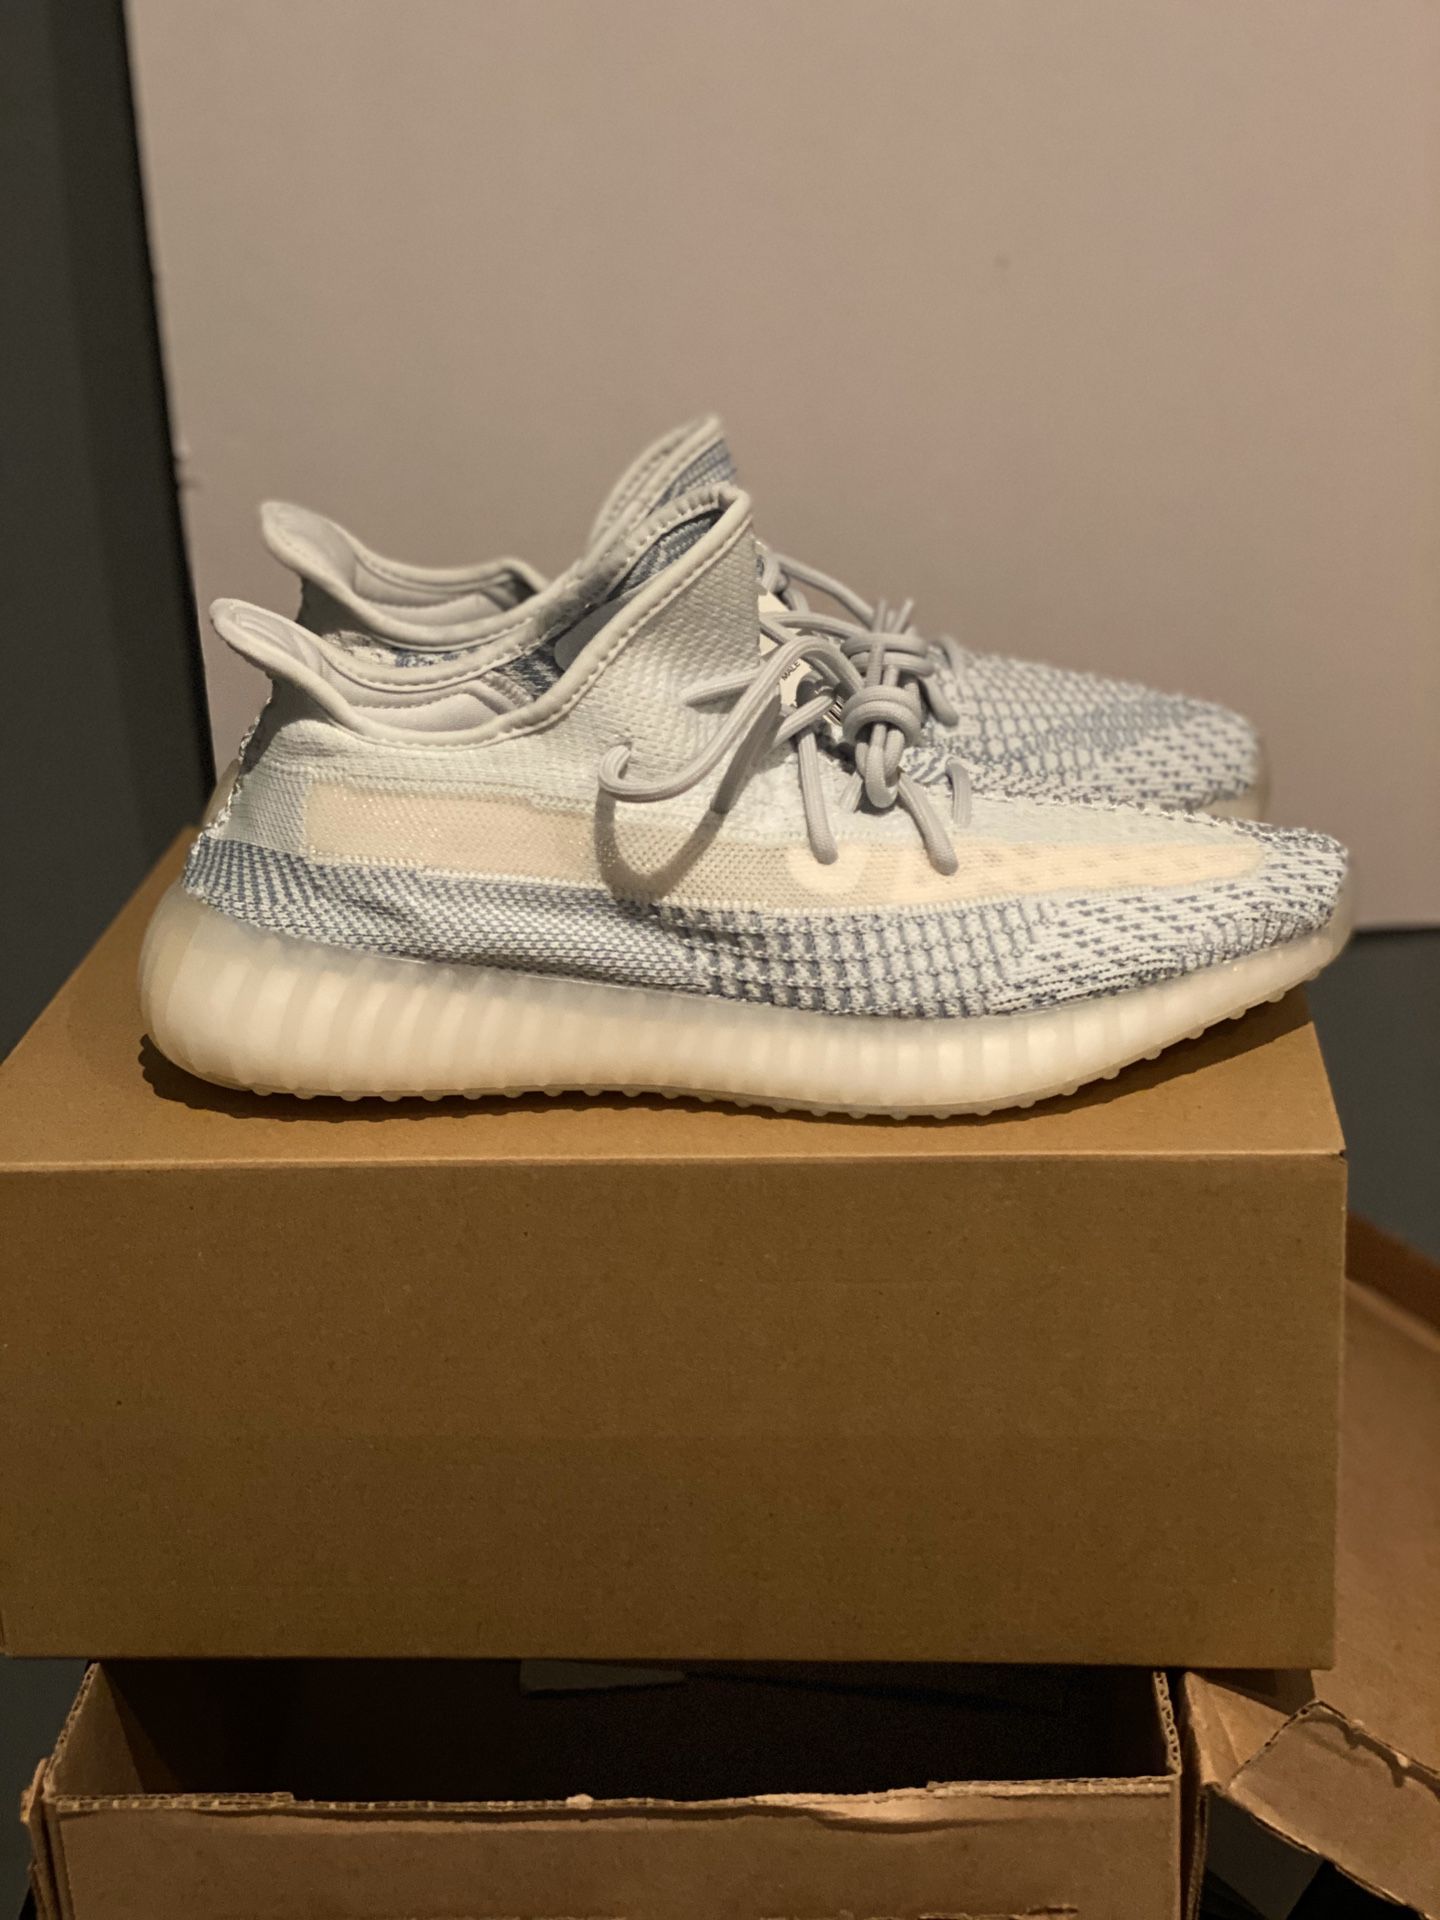 Adidas Yeezy 350 Boost v2 Cloud White Size 10.5